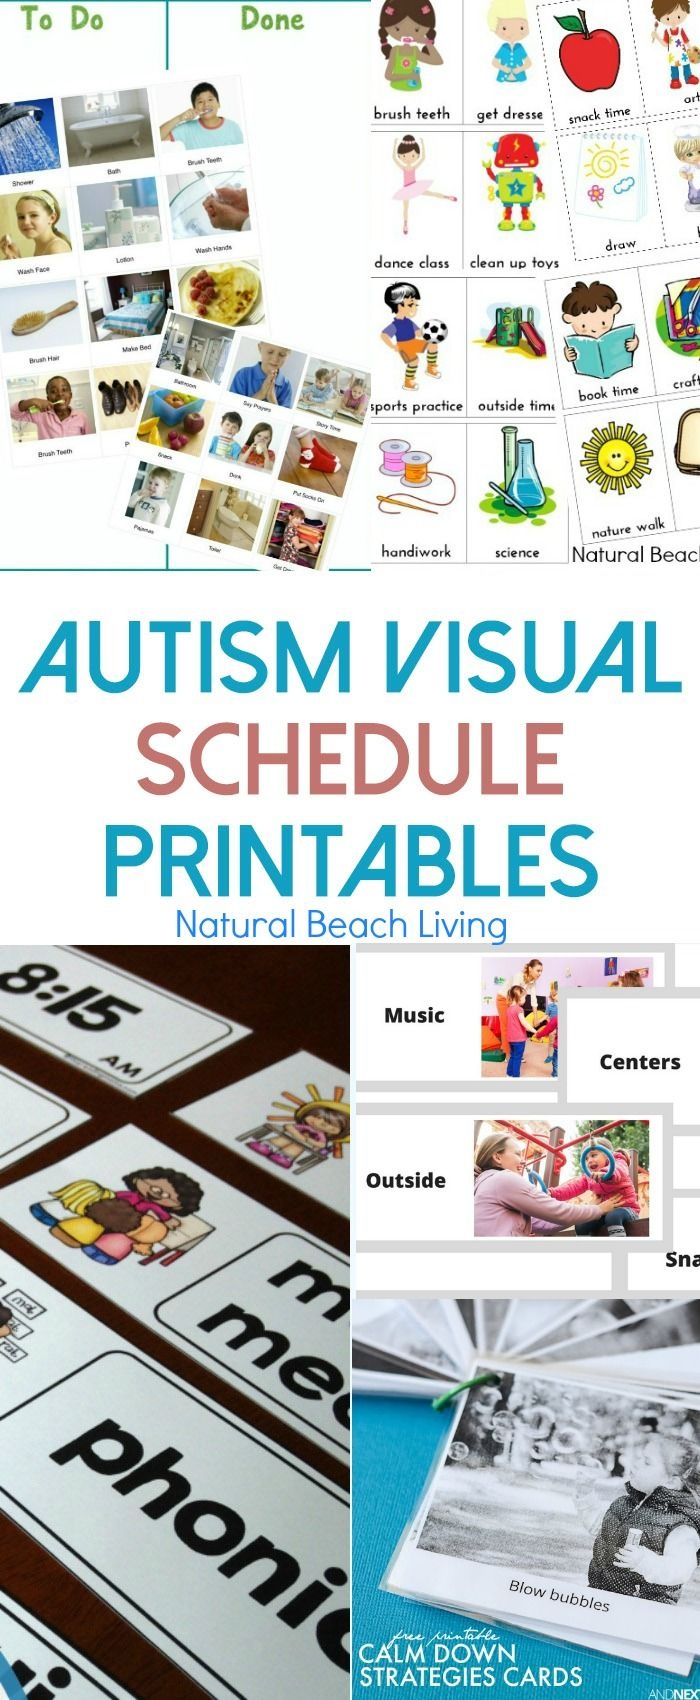 10+ Free Autism Visual Schedule Printables To Try Right Now | Super - Free Printable Picture Schedule For Preschool